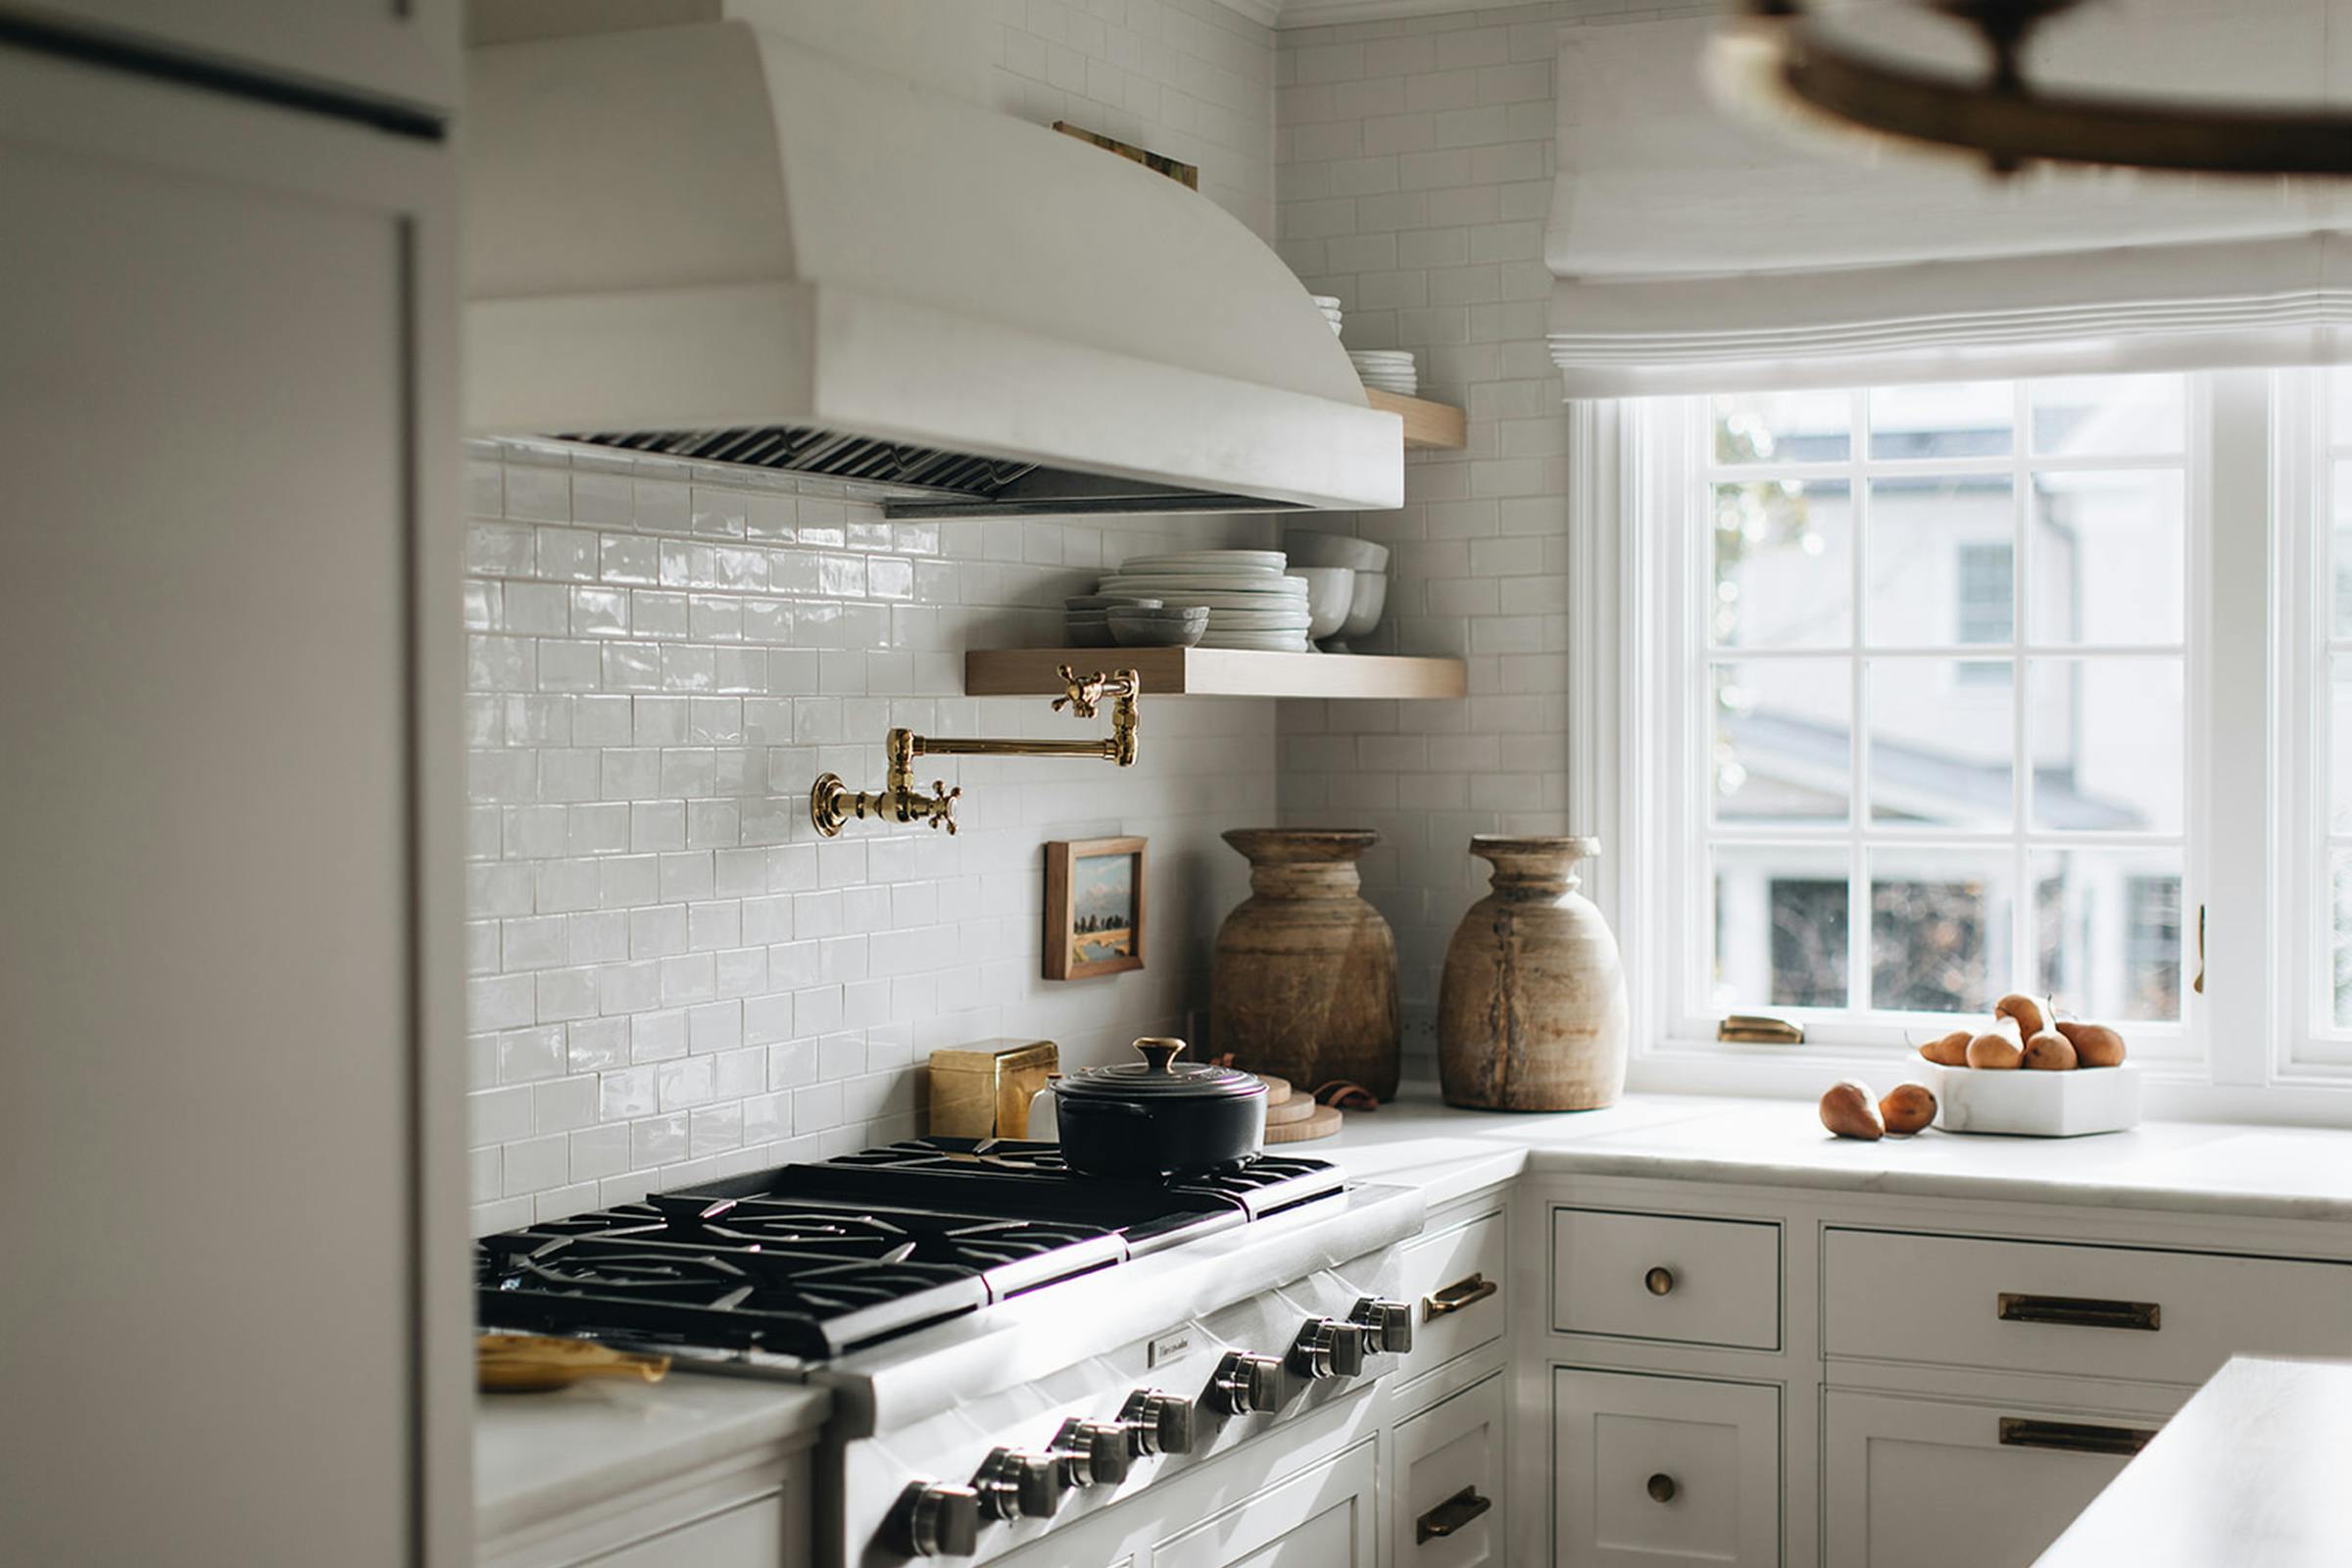 Nicole-Green-Design-Project-Chevy-Chase-Historic-East-Coast-Home-Kitchen-2